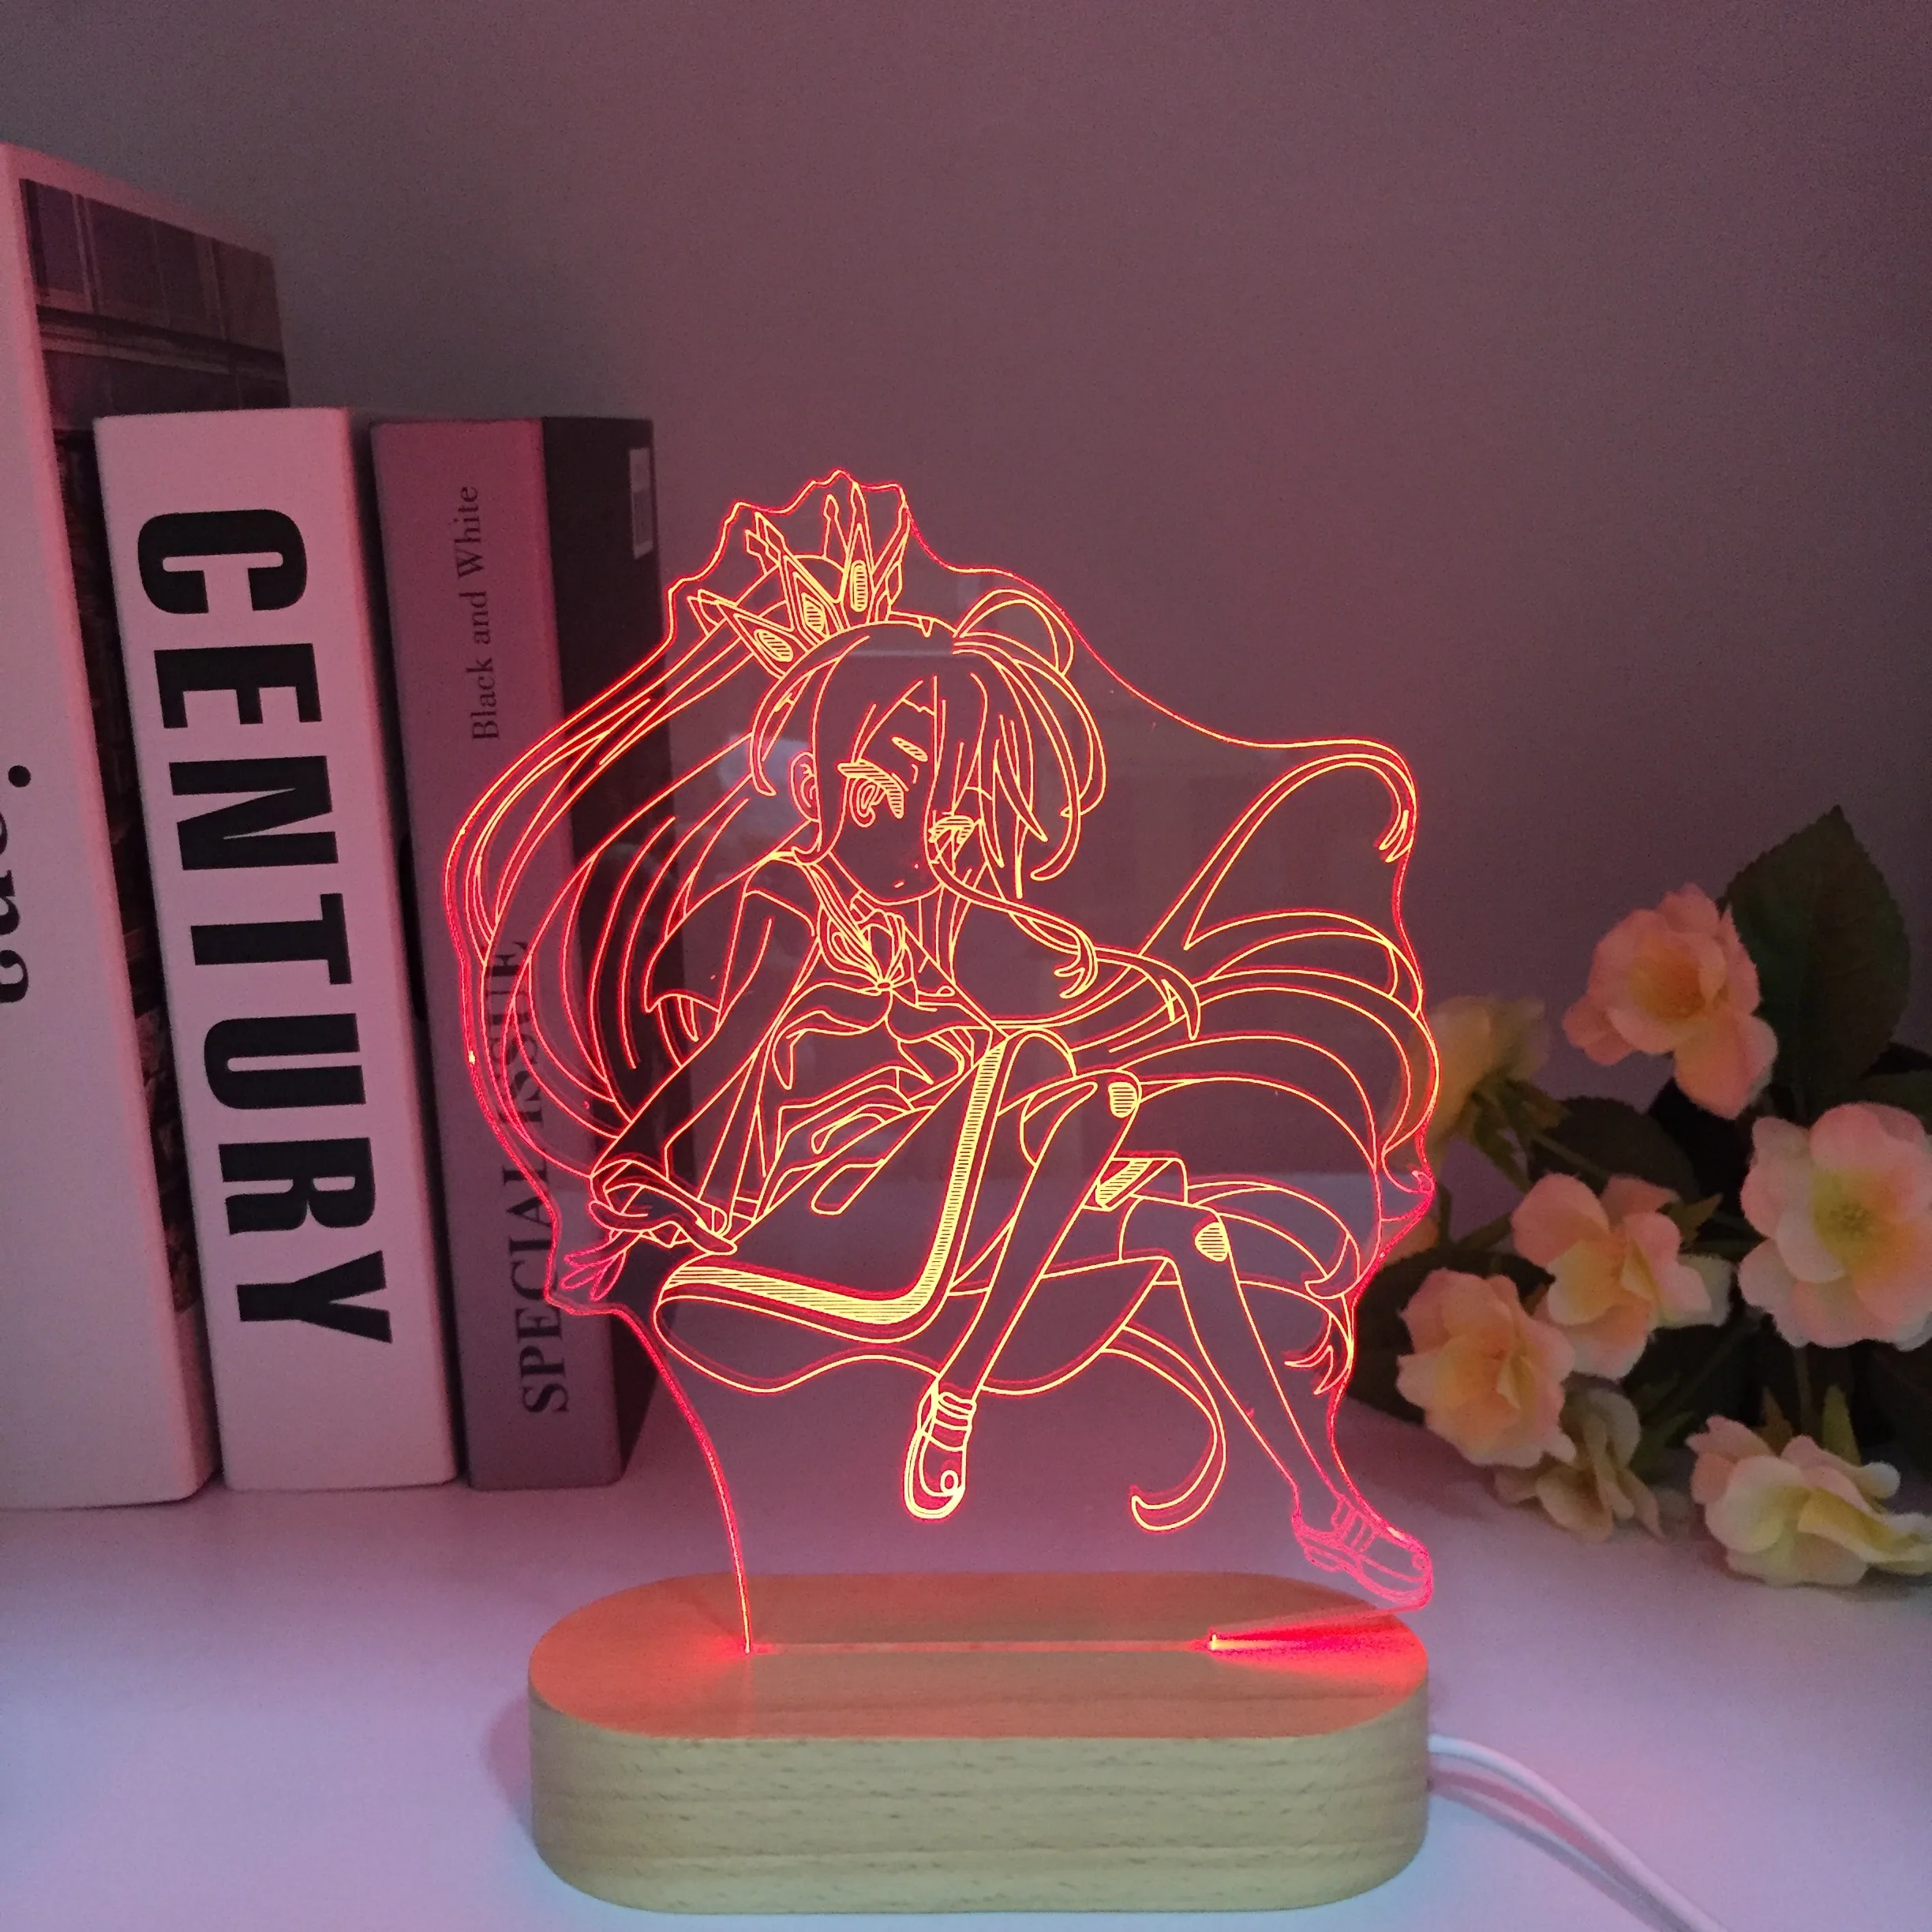 Wooden Remote Danganronpa 3 LED Lamp 3D Night Light Figure Mikan Tsumiki for Bedroom Decor Kids Gift Light Acrylic Table Lamp images - 6